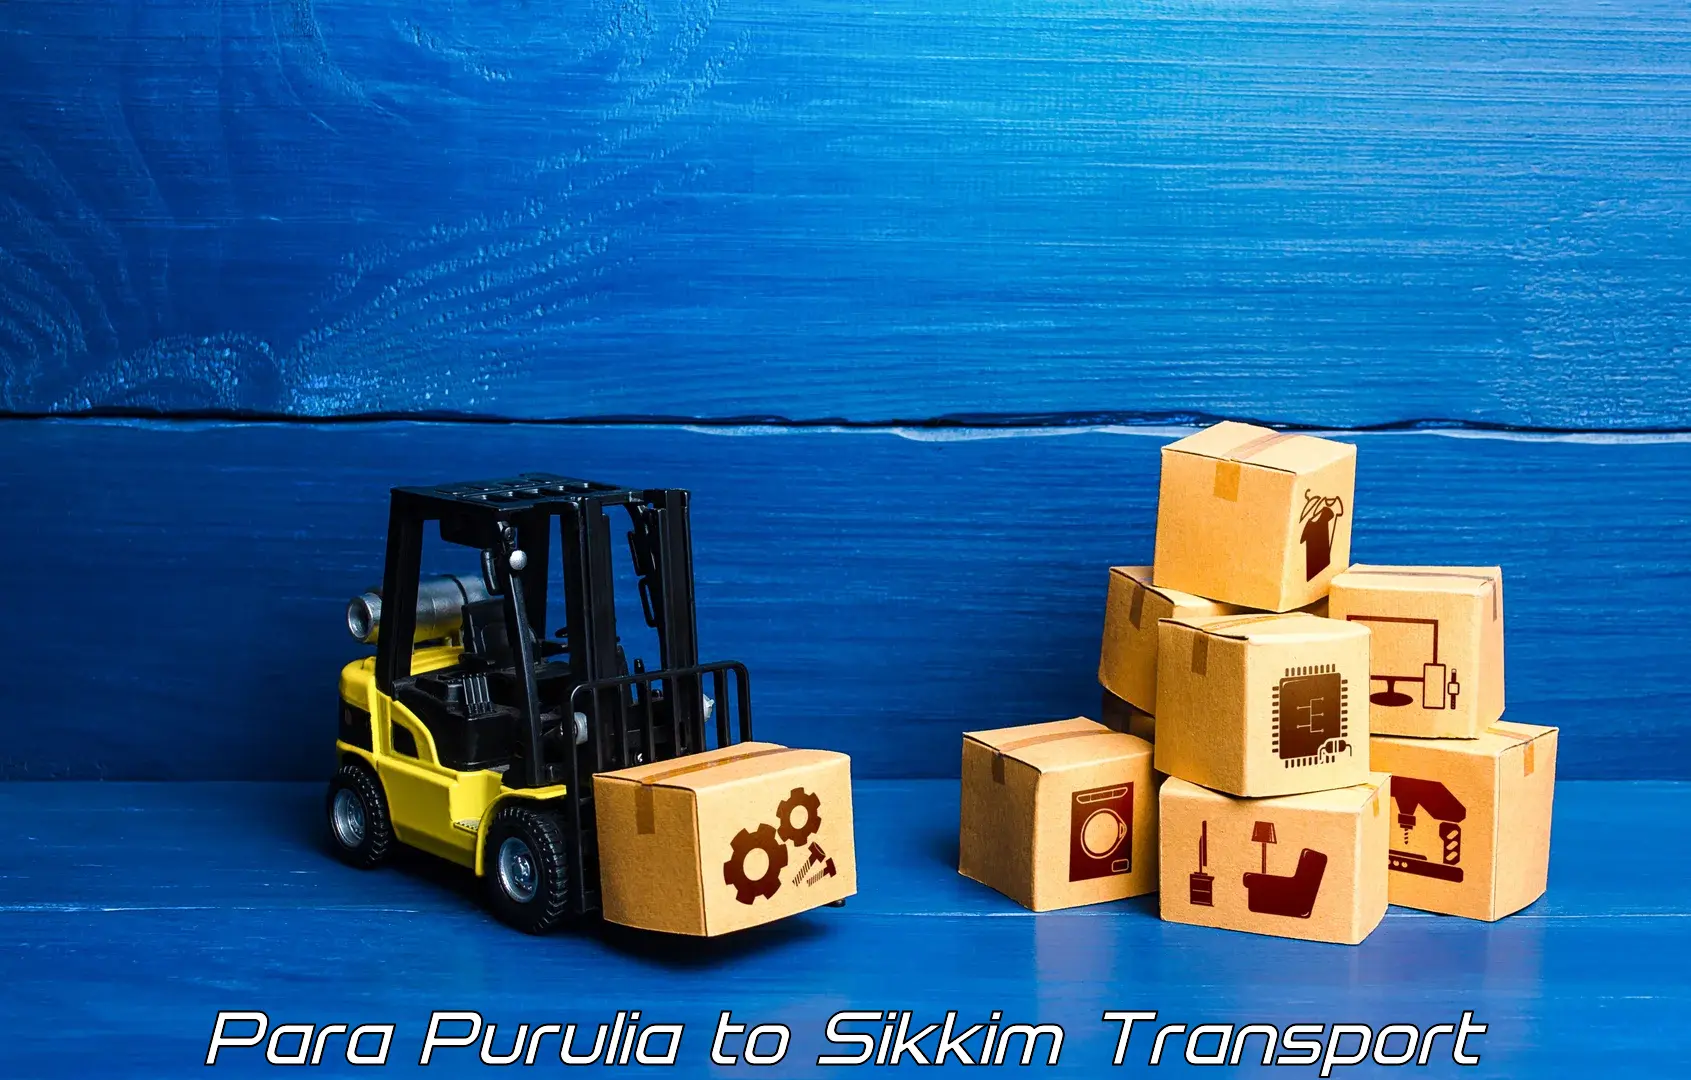 Container transport service Para Purulia to East Sikkim